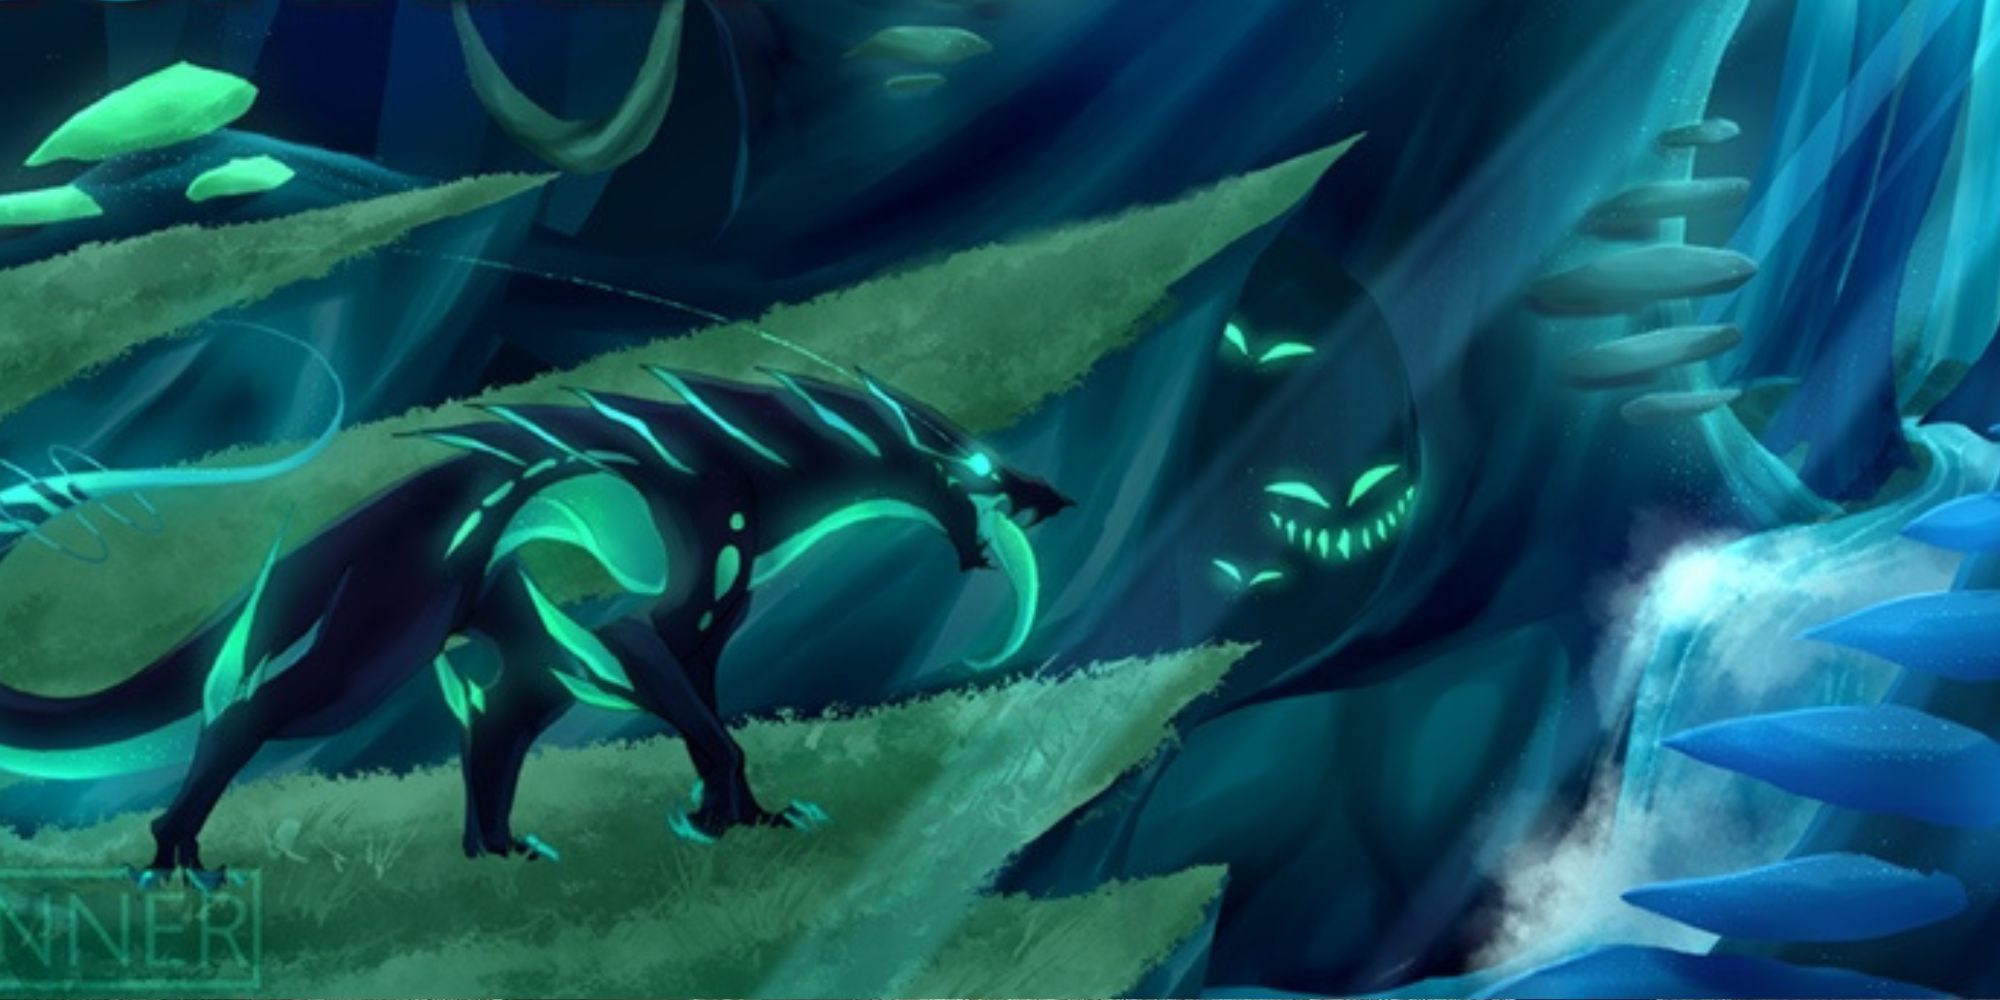 An image from Creatures of Sonaria showing a sharp dog-like creature in a creepy glade